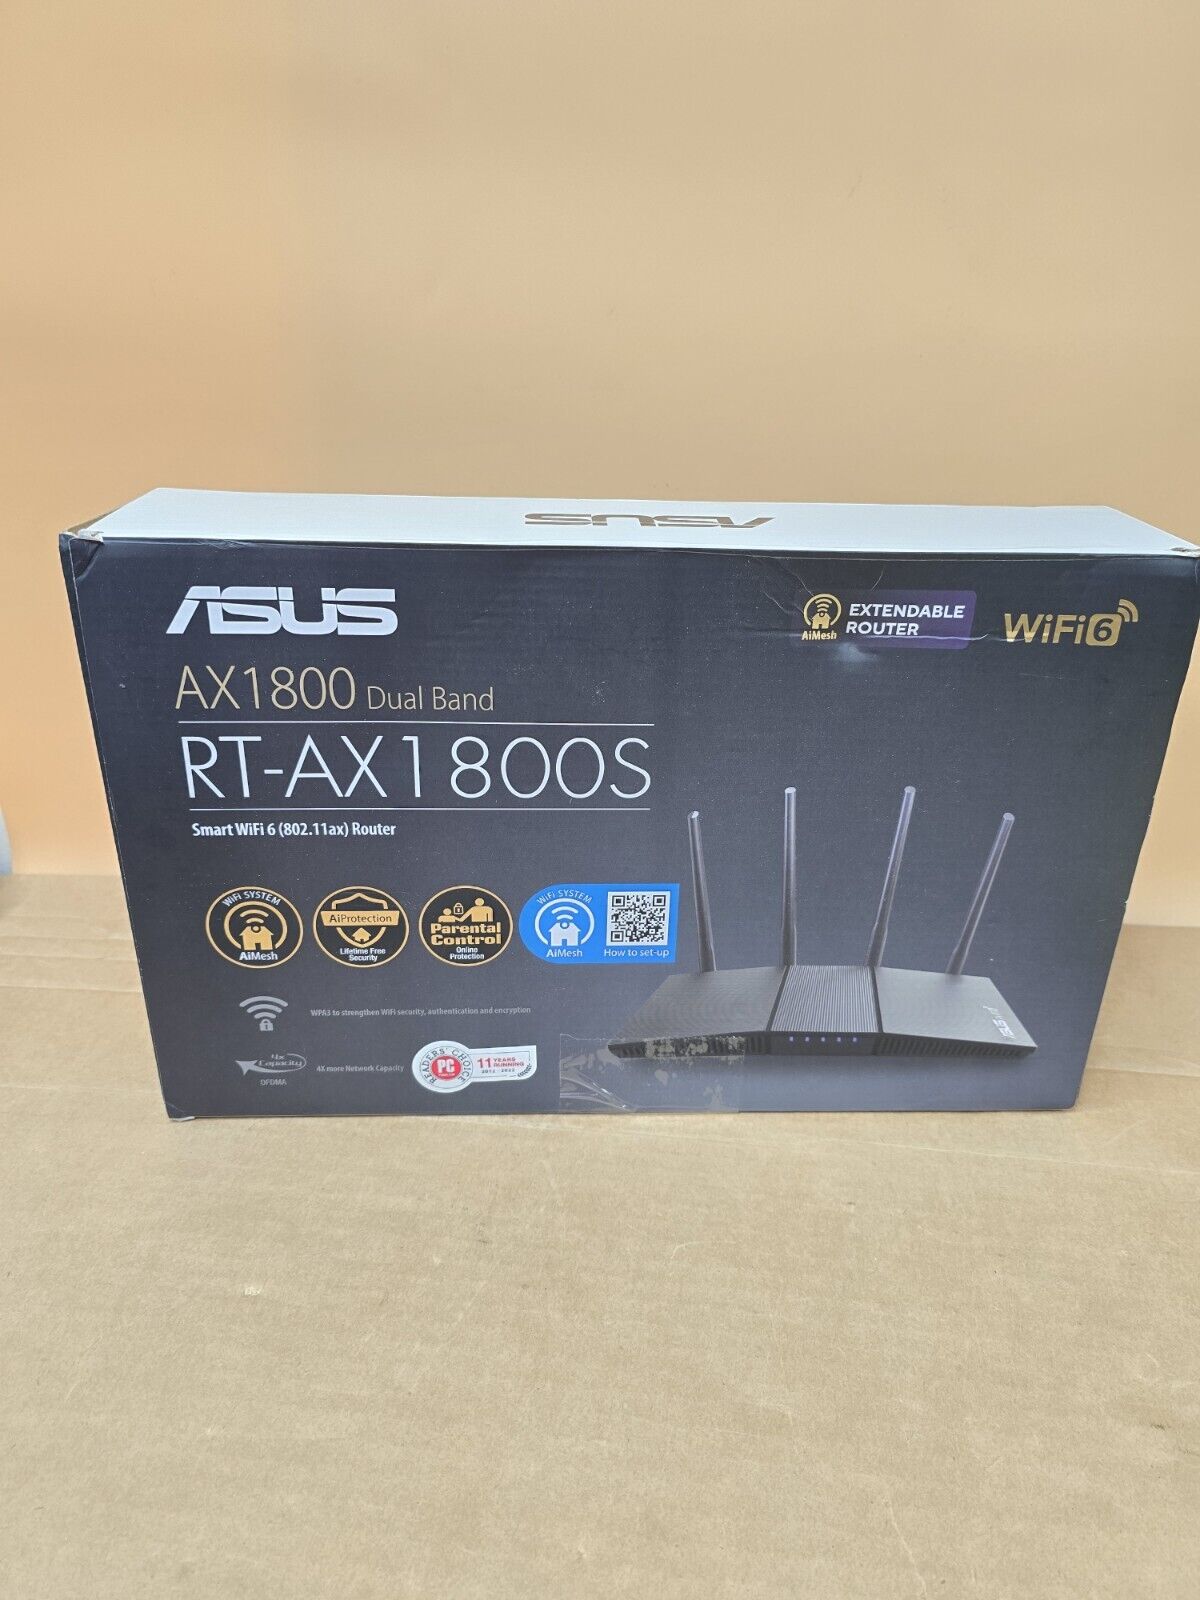 ASUS RT-AX1800S Dual Band WiFi 6 Extendable Router AX1800 Dual Band..